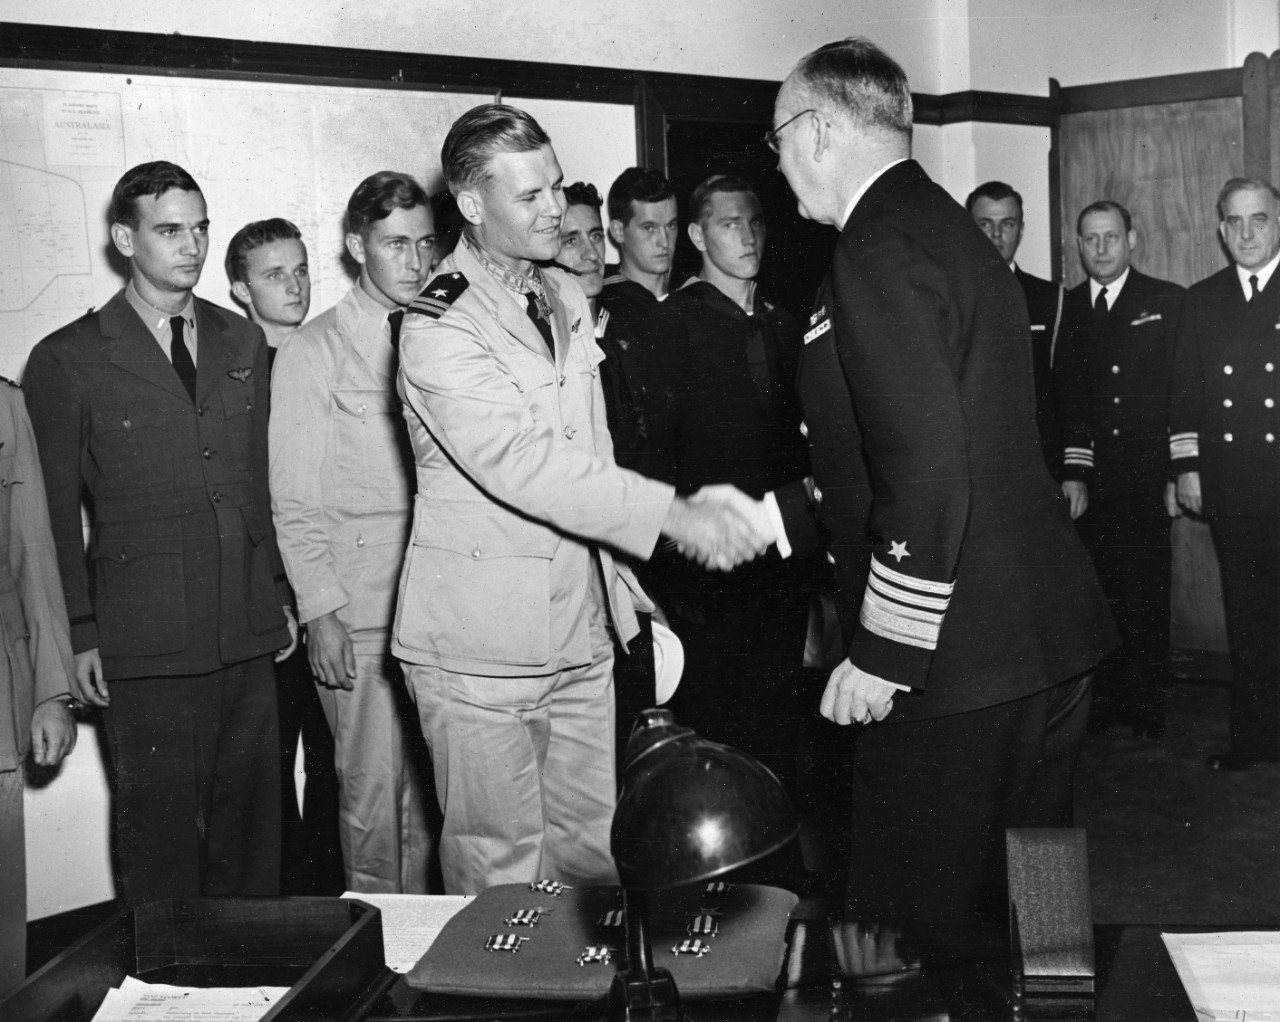 Vice Admiral Thomas C. Kinkaid, USN (right) (Commander, Seventh Fleet) and Lieutenant Nathan G. Gordon, USNR (left) shaking hands after Gordon was presented the Medal of Honor at Seventh Fleet Headquarters on 19 August 1944.